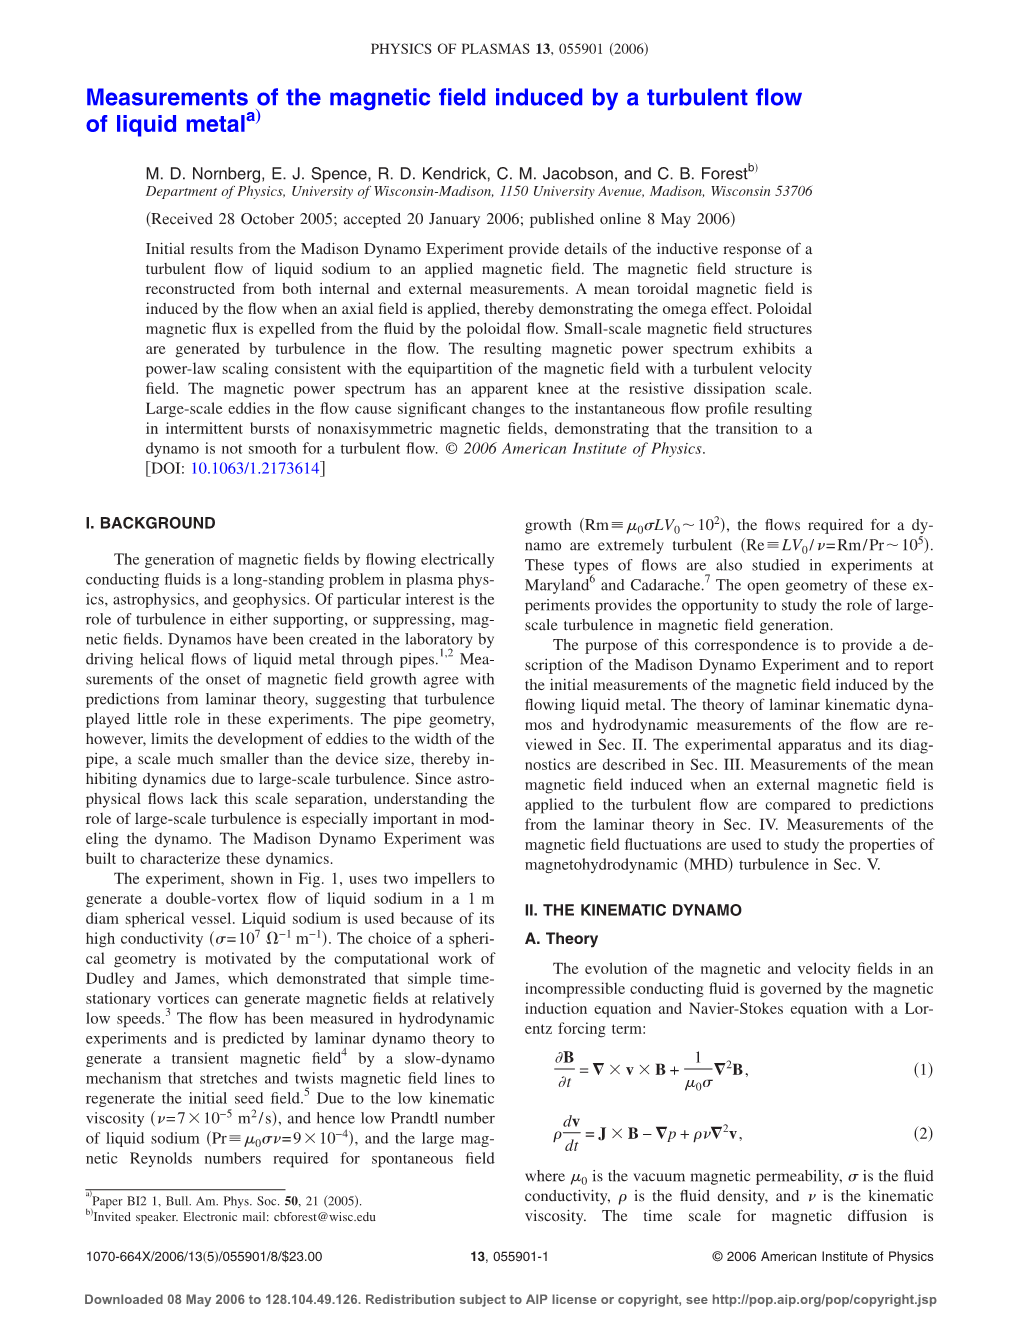 Measurements of the Magnetic Field Induced by a Turbulent Flow of Liquid